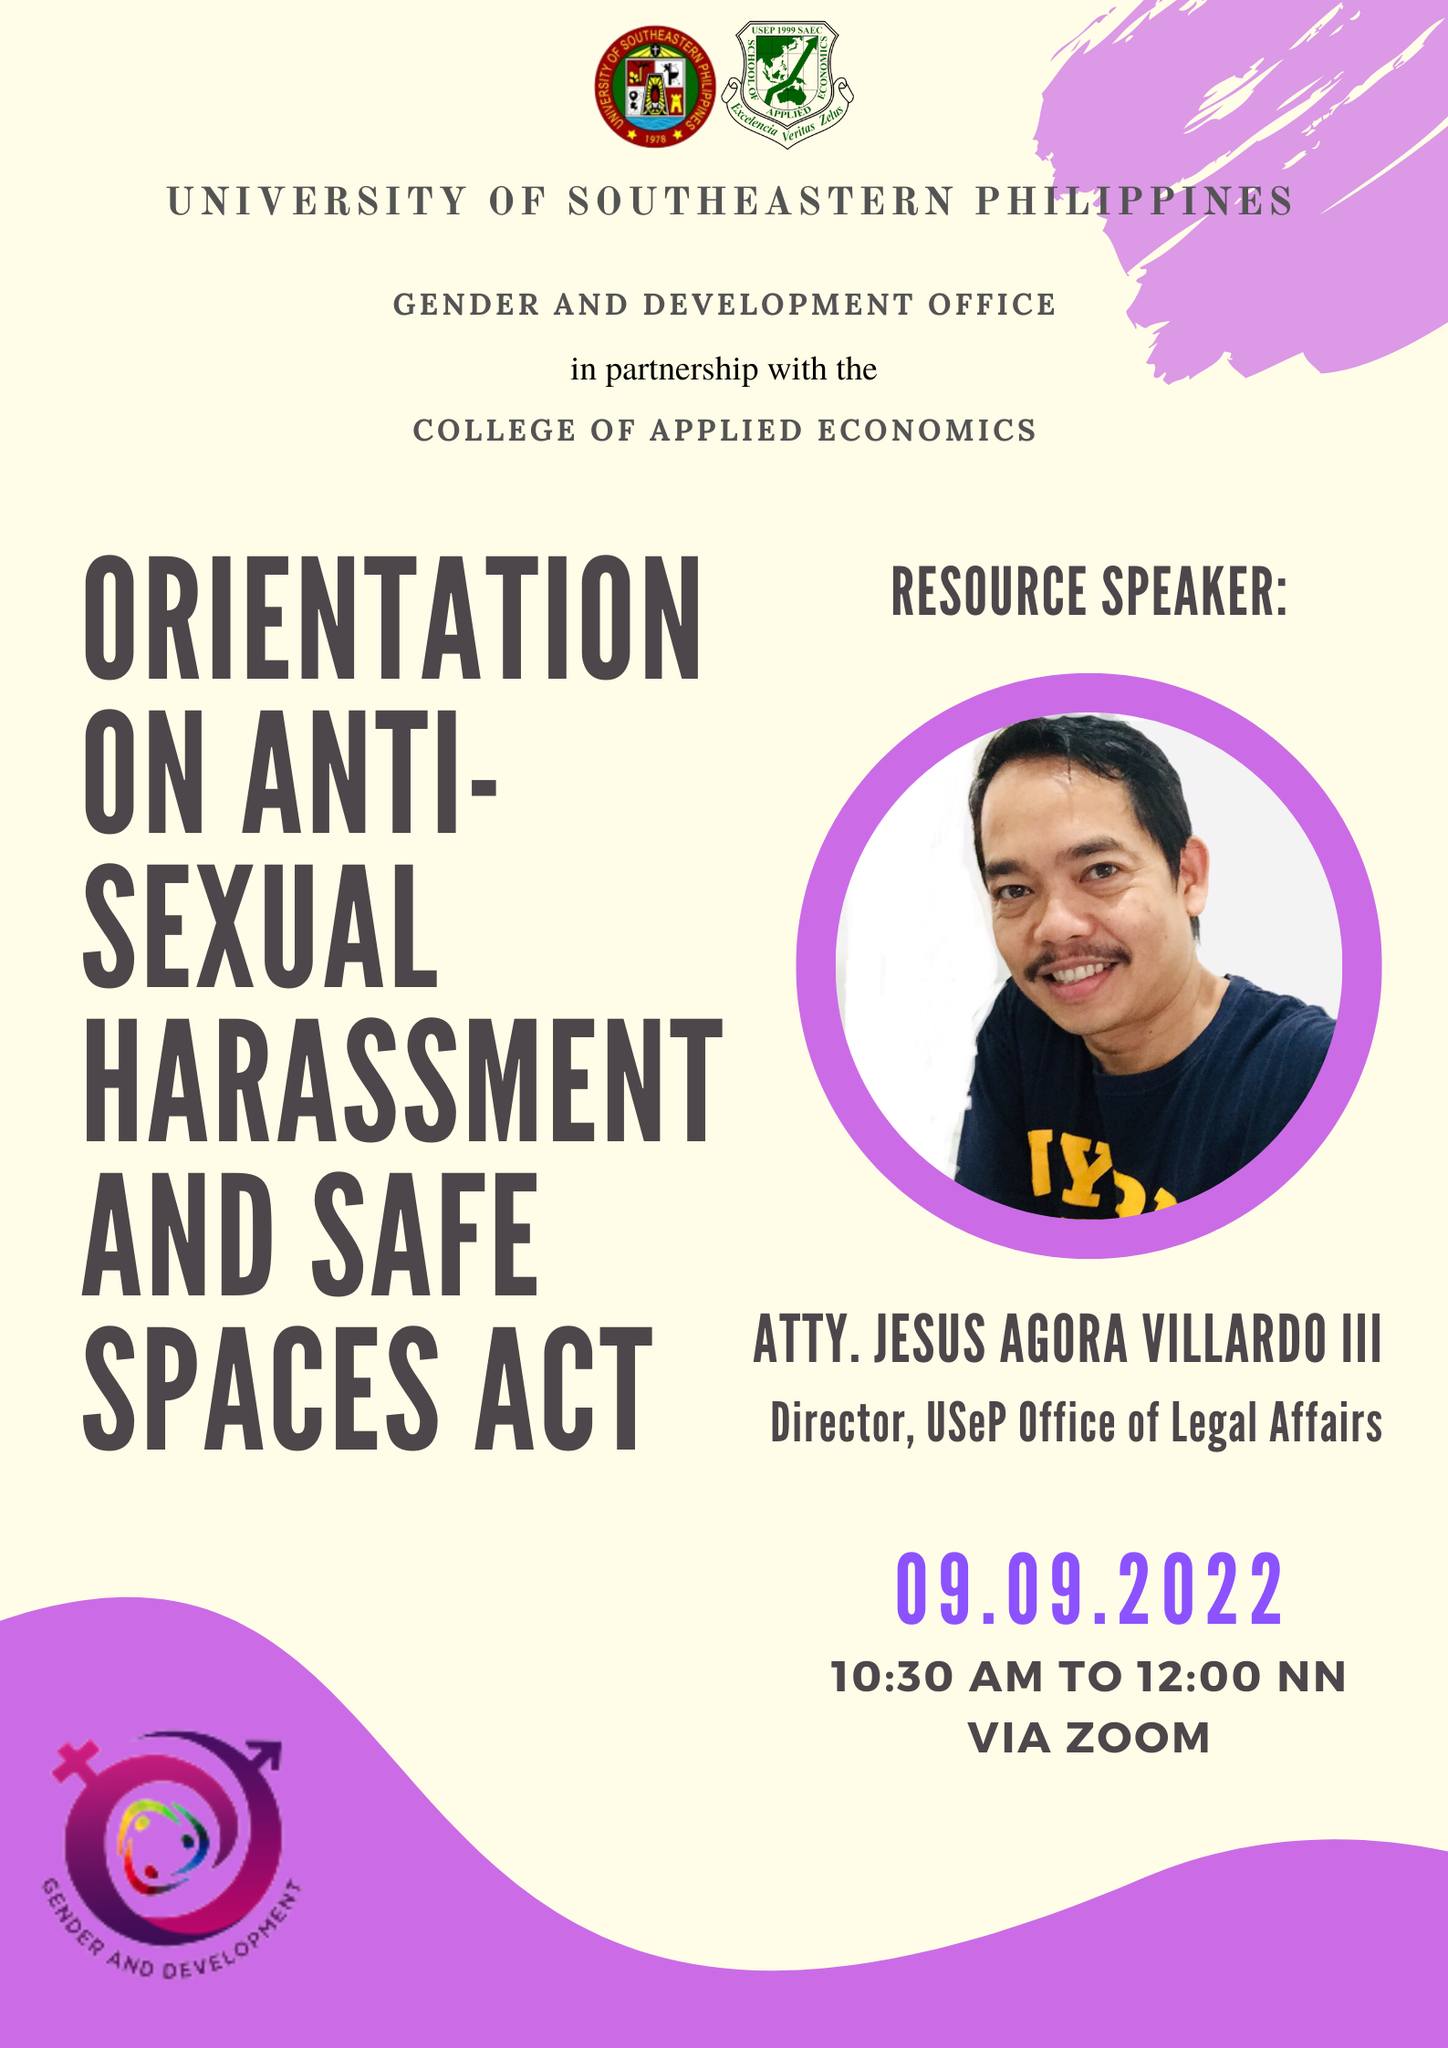 CAEc through GAD Office conducts Anti-Sexual Harassment with Safe Spaces Act Orientation